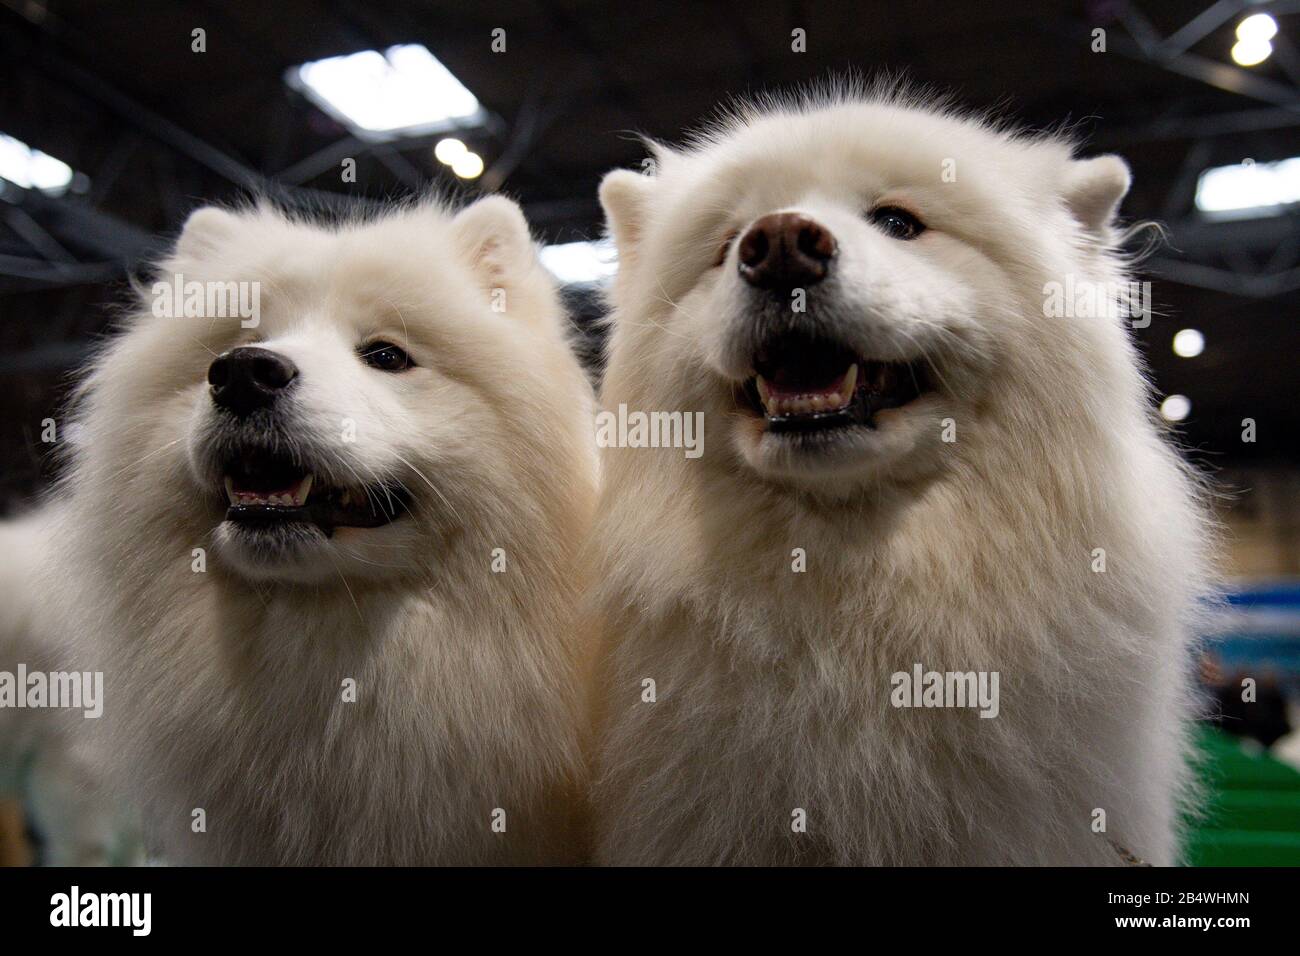 Samoyed dogs at the Birmingham National Exhibition Centre (NEC) for the third day of the Crufts Dog Show. Stock Photo